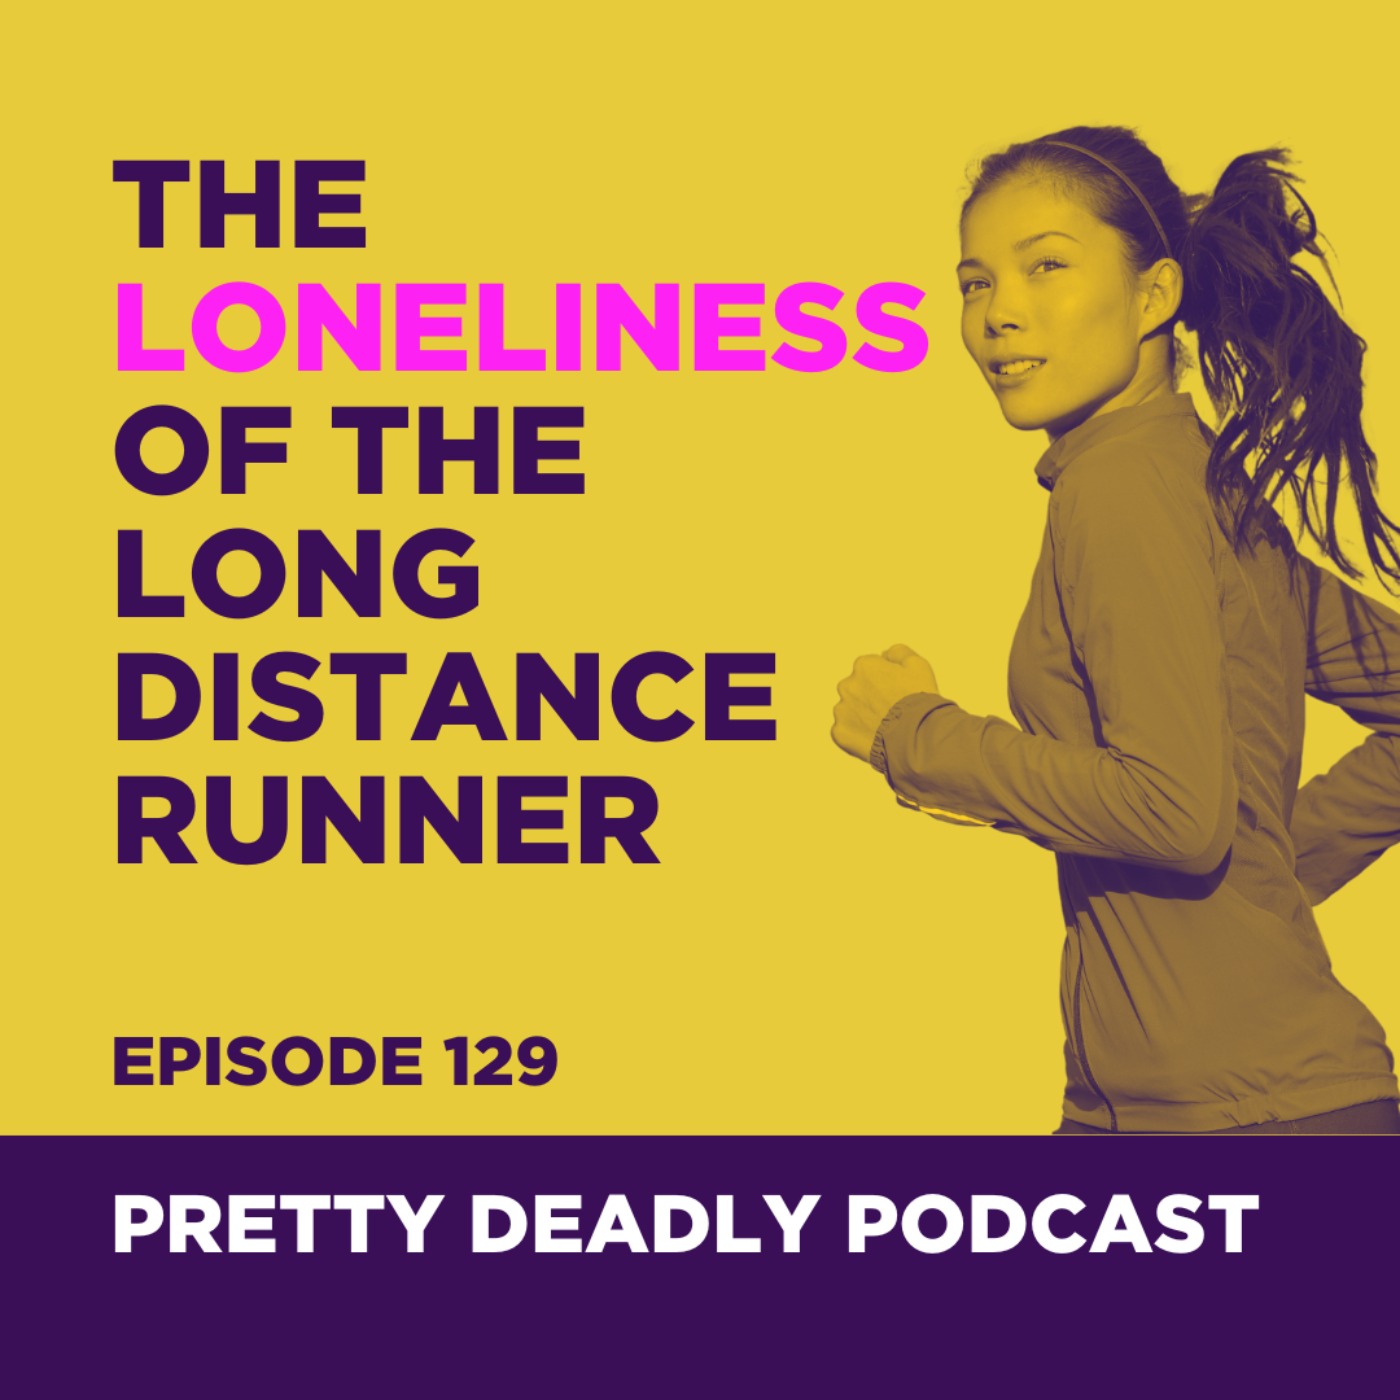 S8 Episode 129: The Loneliness of the Long Distance Runner